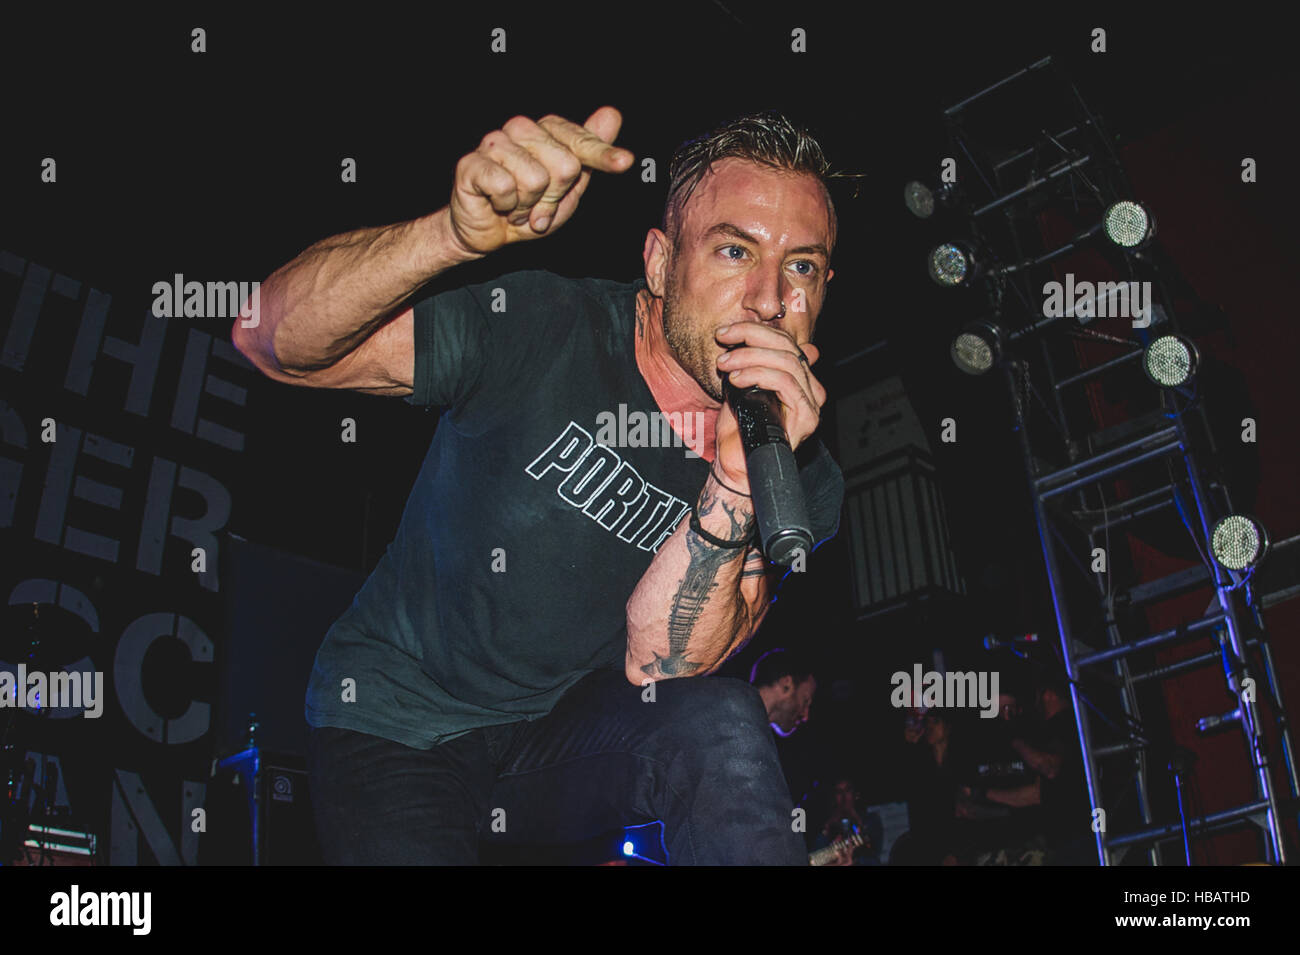 Romagnano Sesia, Italy. 04th Oct, 2013. The Dillinger Escape Plan performing live at the Rock n Roll Arena in Romagnano Sesia. © Alessandro Bosio/Pacific Press/Alamy Live News Stock Photo